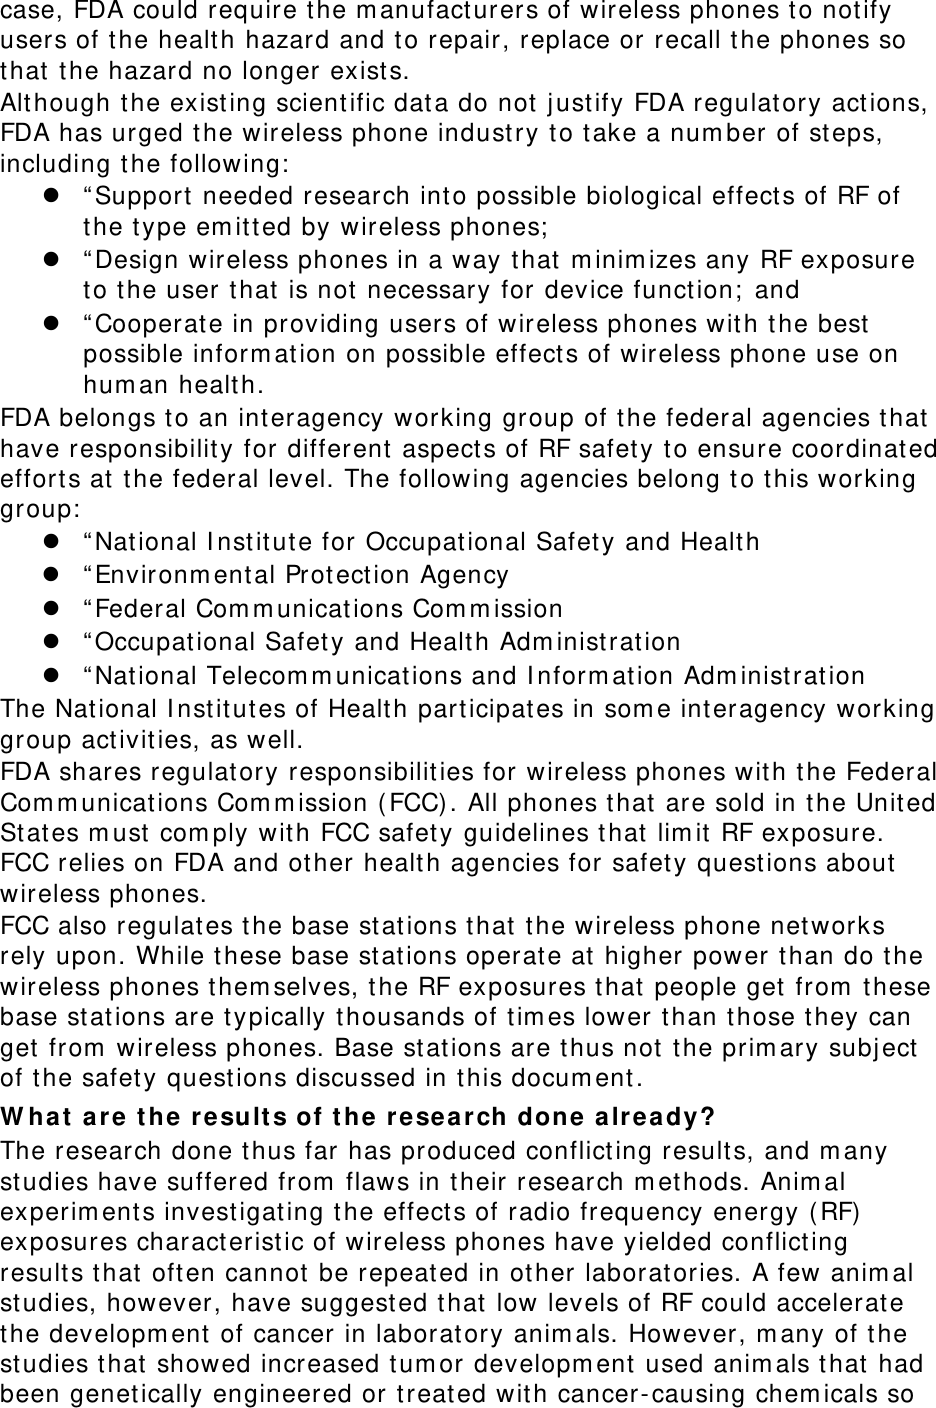 case, FDA could require t he m anufact ur ers of wireless phones t o not ify users of the healt h hazard and to repair, replace or recall t he phones so that the hazard no longer exists. Alt hough t he exist ing scient ific dat a do not  j ustify FDA regulatory act ions, FDA has urged t he wireless phone indust ry t o t ake a num ber of st eps, including t he following:   “ Support needed research int o possible biological effect s of RF of the t ype em it t ed by wireless phones;   “ Design wireless phones in a way that  m inim izes any RF exposure to t he user t hat is not necessary for device function;  and  “ Cooperate in pr oviding users of wireless phones with t he best  possible inform at ion on possible effect s of wireless phone use on hum an health. FDA belongs t o an int eragency working group of the feder al agencies t hat  have responsibility for different aspect s of RF safety t o ensure coordinated effort s at  the federal level. The following agencies belong t o this working group:   “ Nat ional I nst itute for Occupational Safety and Healt h  “ Environm ental Prot ect ion Agency  “ Federal Com m unicat ions Com m ission  “ Occupational Safety and Healt h Adm inistrat ion  “ Nat ional Telecom m unicat ions and I nform at ion Adm inist rat ion The Nat ional I nst it ut es of Health par ticipat es in som e inter agency working group act ivit ies, as well. FDA shares regulatory responsibilit ies for w ireless phones wit h t he Federal Com m unicat ions Com m ission ( FCC). All phones t hat are sold in t he Unit ed St ates m ust  com ply with FCC safety guidelines t hat lim it RF exposure. FCC relies on FDA and ot her healt h agencies for safety quest ions about wireless phones. FCC also regulates t he base st ations t hat t he wireless phone net works rely upon. While t hese base st ations operat e at higher power t han do t he wireless phones t hem selves, the RF exposures that people get from  these base st ations are typically t housands of t im es lower than those t hey can get from  wireless phones. Base st ations are thus not the prim ary subj ect of the safety quest ions discussed in this docum ent . W ha t  a re t he  r esu lt s of t h e resea r ch done a lre a dy? The research done t hus far has produced conflict ing results, and m any studies have suffered from  flaws in t heir research m ethods. Anim al experim ent s invest igat ing t he effect s of radio frequency energy ( RF)  exposures characterist ic of wireless phones have yielded conflicting results t hat often cannot be repeated in ot her laboratories. A few anim al studies, however , have suggest ed that low levels of RF could accelerate the developm ent  of cancer in laboratory anim als. However, m any of t he studies that  showed increased tum or developm ent used anim als t hat had been genet ically engineered or t reated with cancer-causing chem icals so 